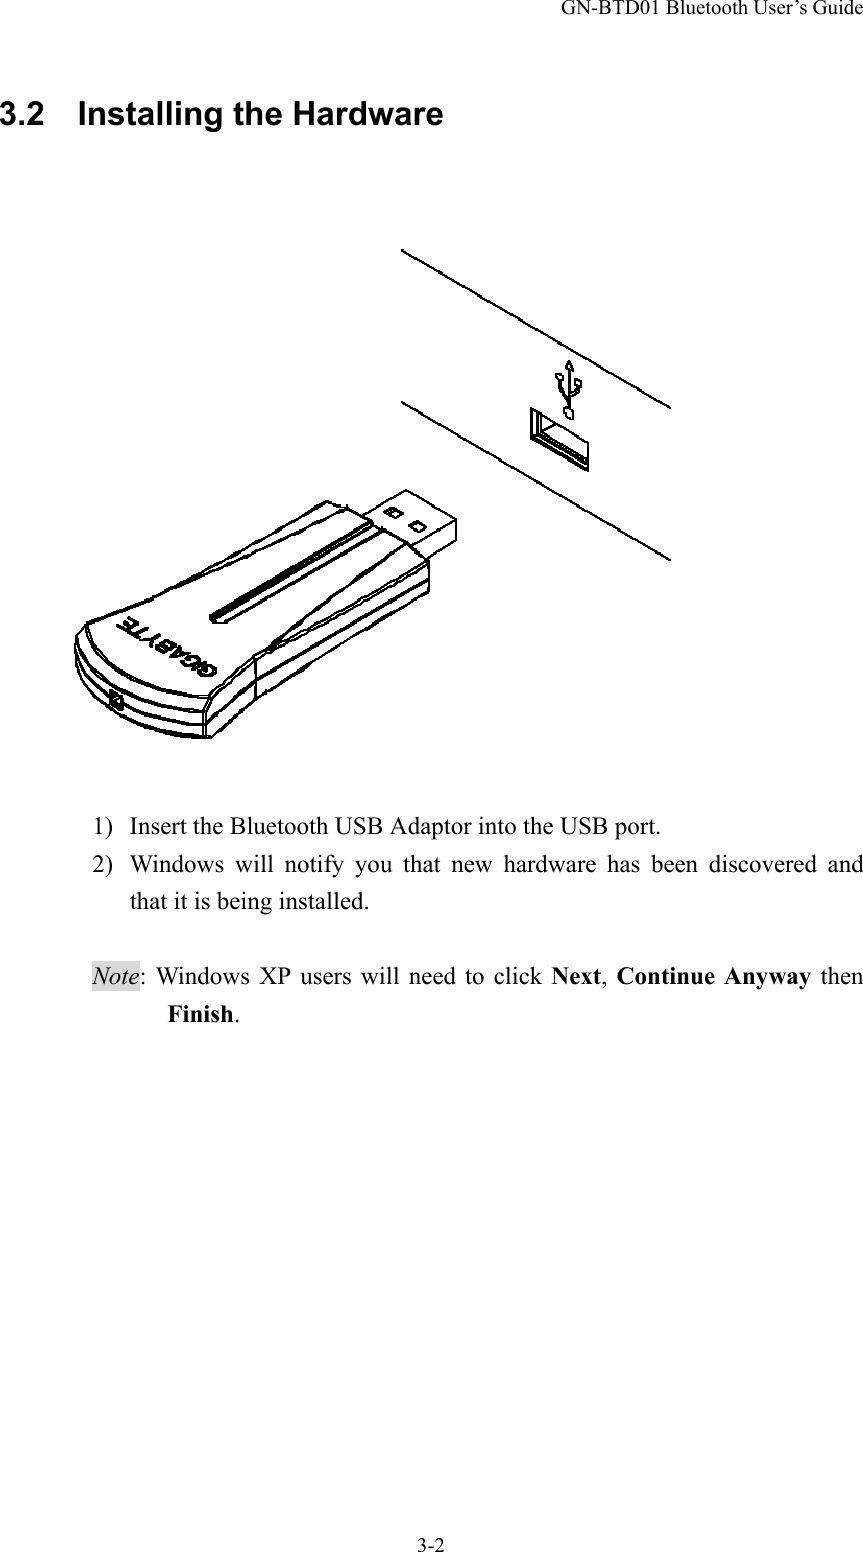 GN-BTD01 Bluetooth User’s Guide 3-2 3.2  Installing the Hardware   1)  Insert the Bluetooth USB Adaptor into the USB port. 2)  Windows will notify you that new hardware has been discovered and that it is being installed.  Note: Windows XP users will need to click Next, Continue Anyway then Finish. 